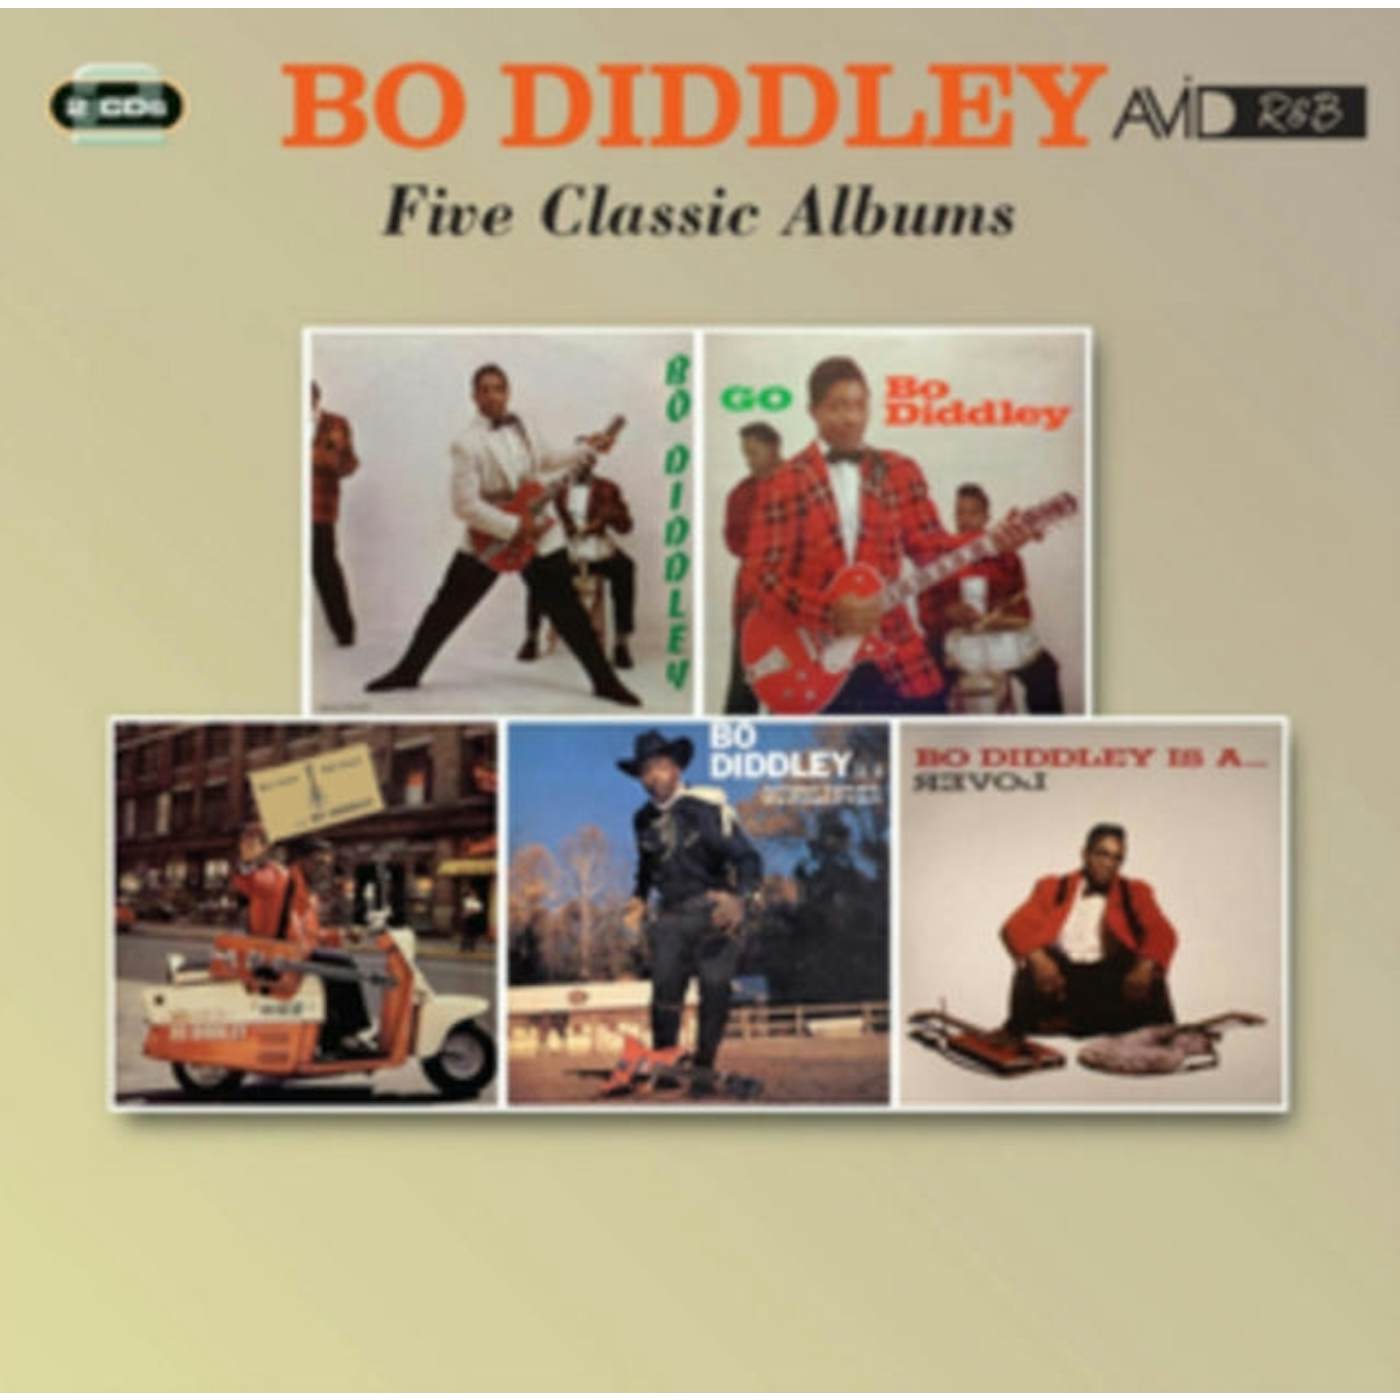 Bo Diddley CD - Five Classic Albums